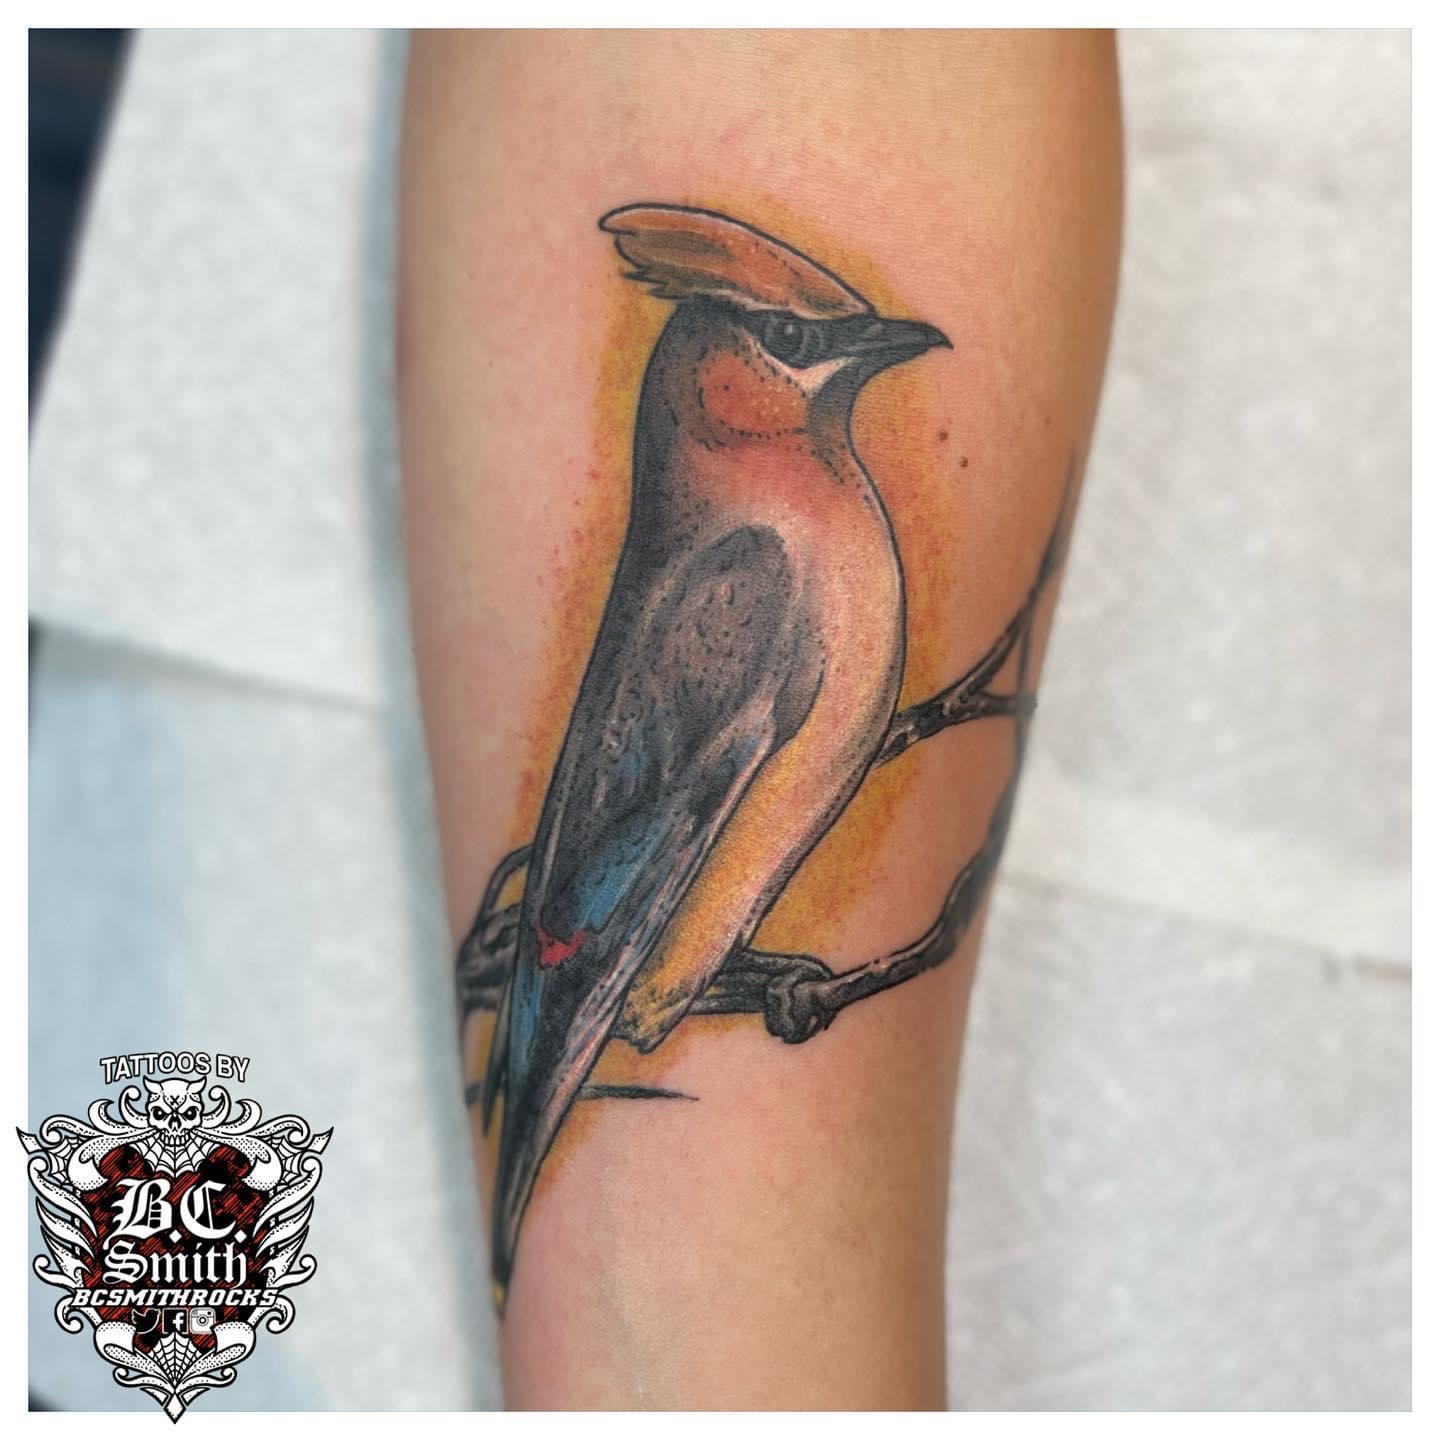 kelsey elliss Instagram photo Cedar waxwing Thanks heaps to Julia  for getting this guy lovely meeting you guys   Pattern tattoo Tattoos  Tattoo artists